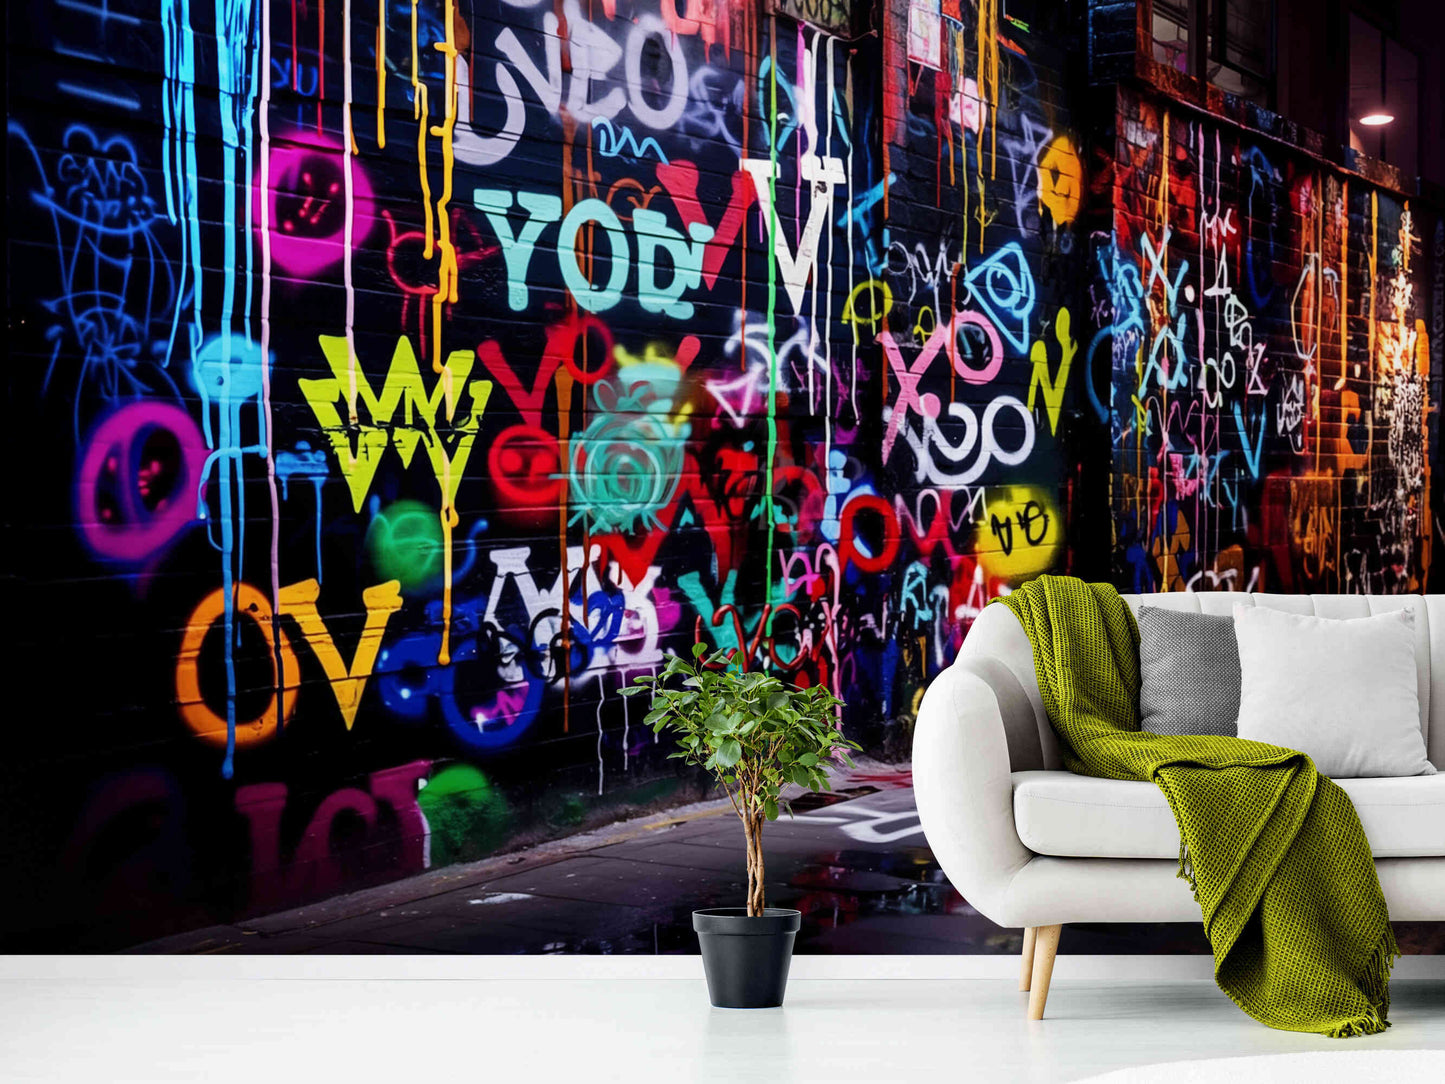 Electric neon meets urban graffiti in this wallpaper, transforming any room into a vibrant spectacle.